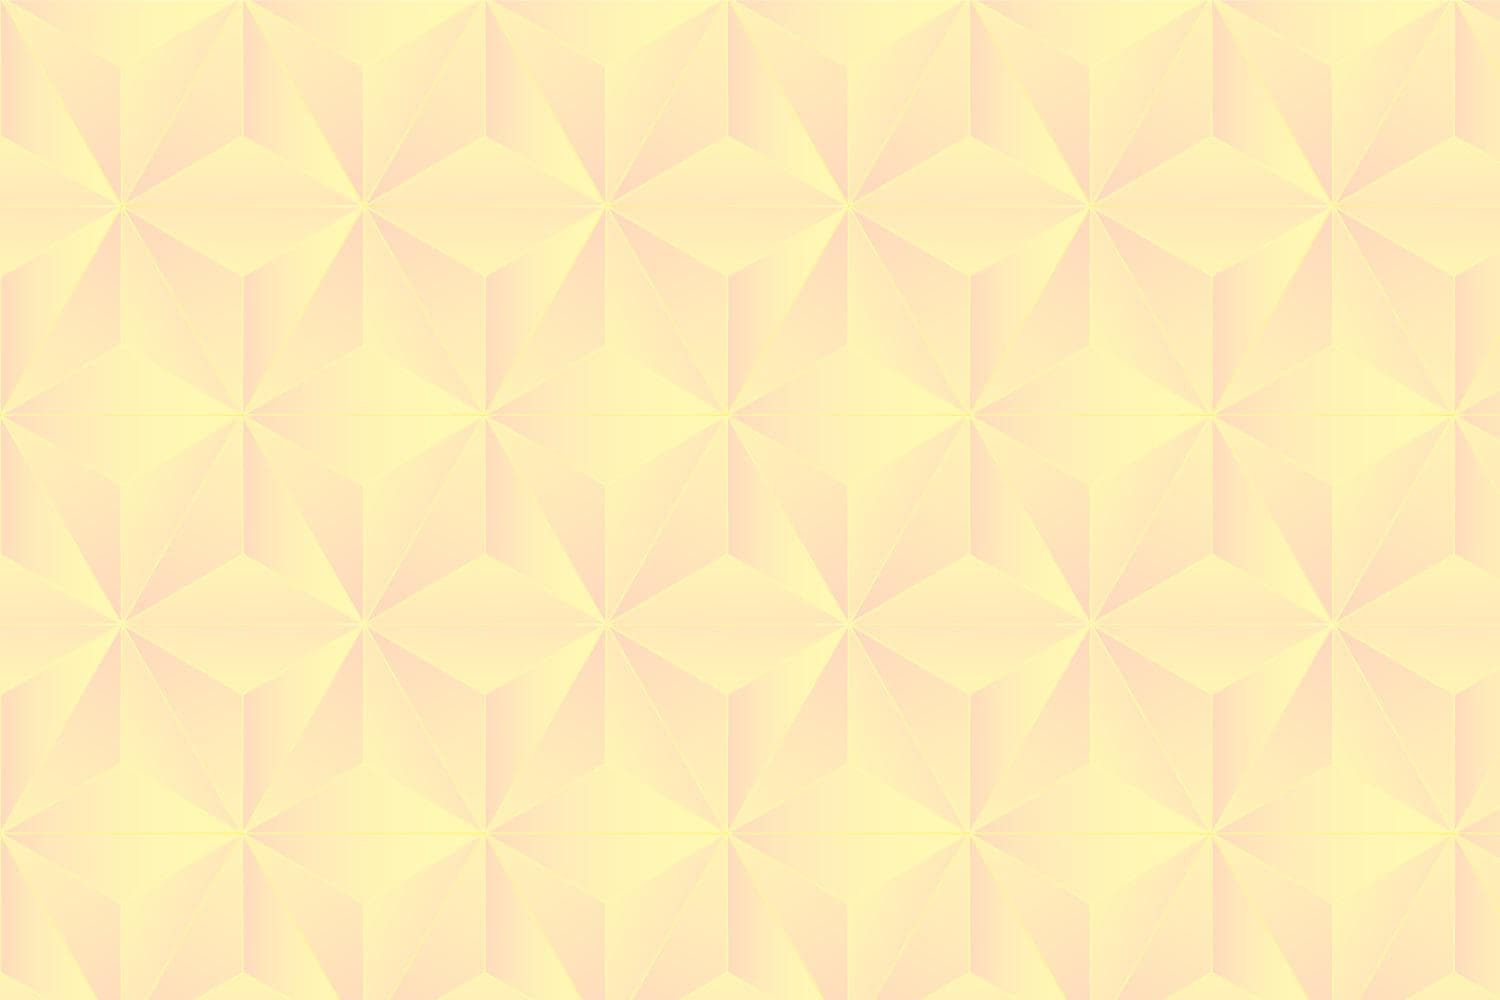 Origami star pattern background in yellow